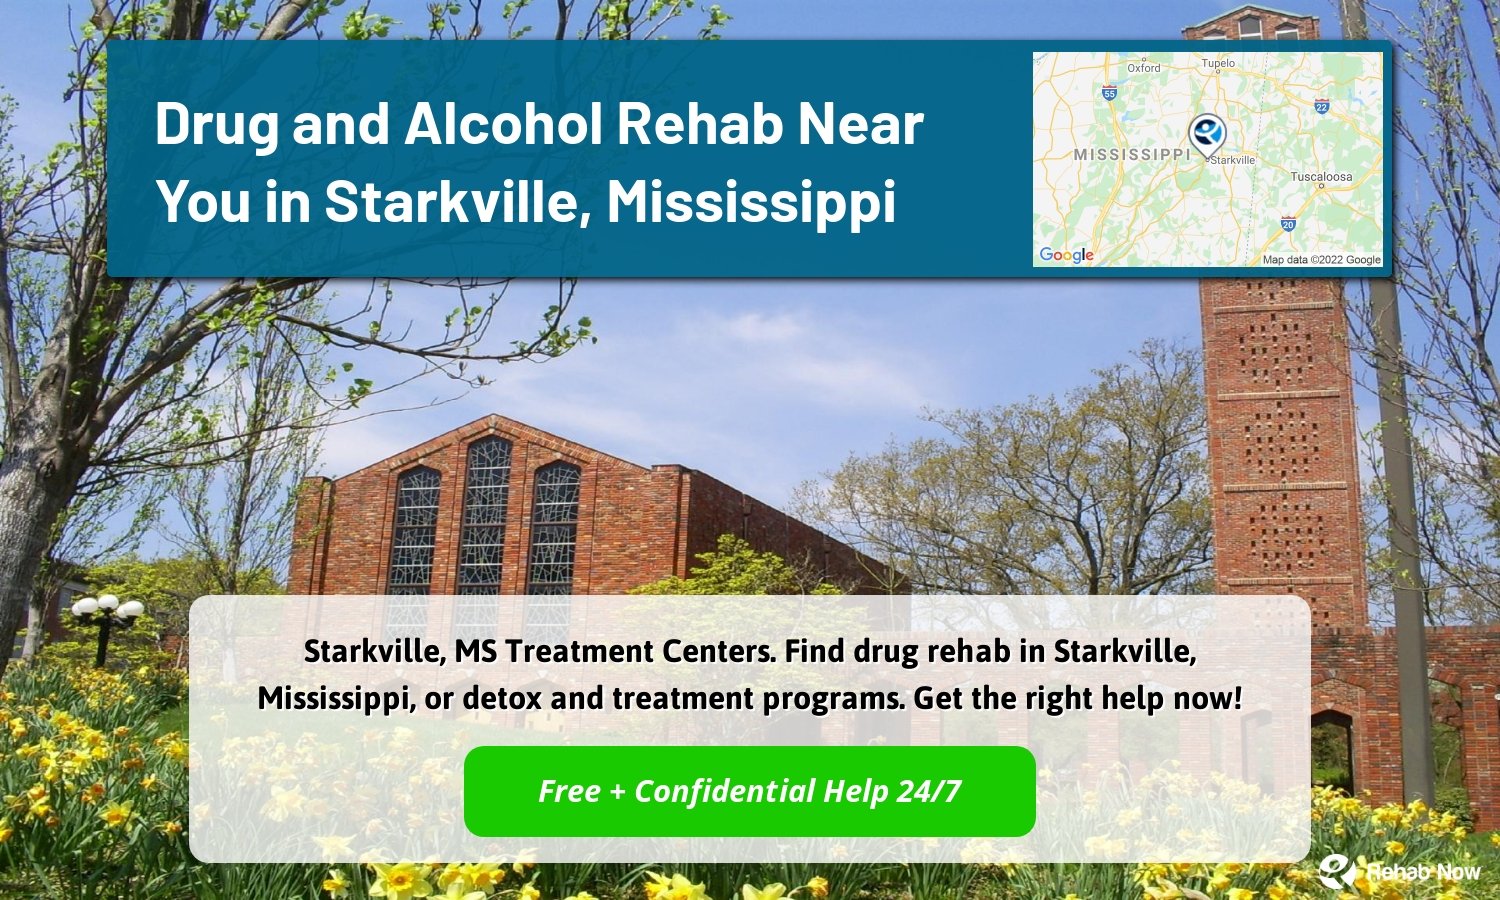 Starkville, MS Treatment Centers. Find drug rehab in Starkville, Mississippi, or detox and treatment programs. Get the right help now!